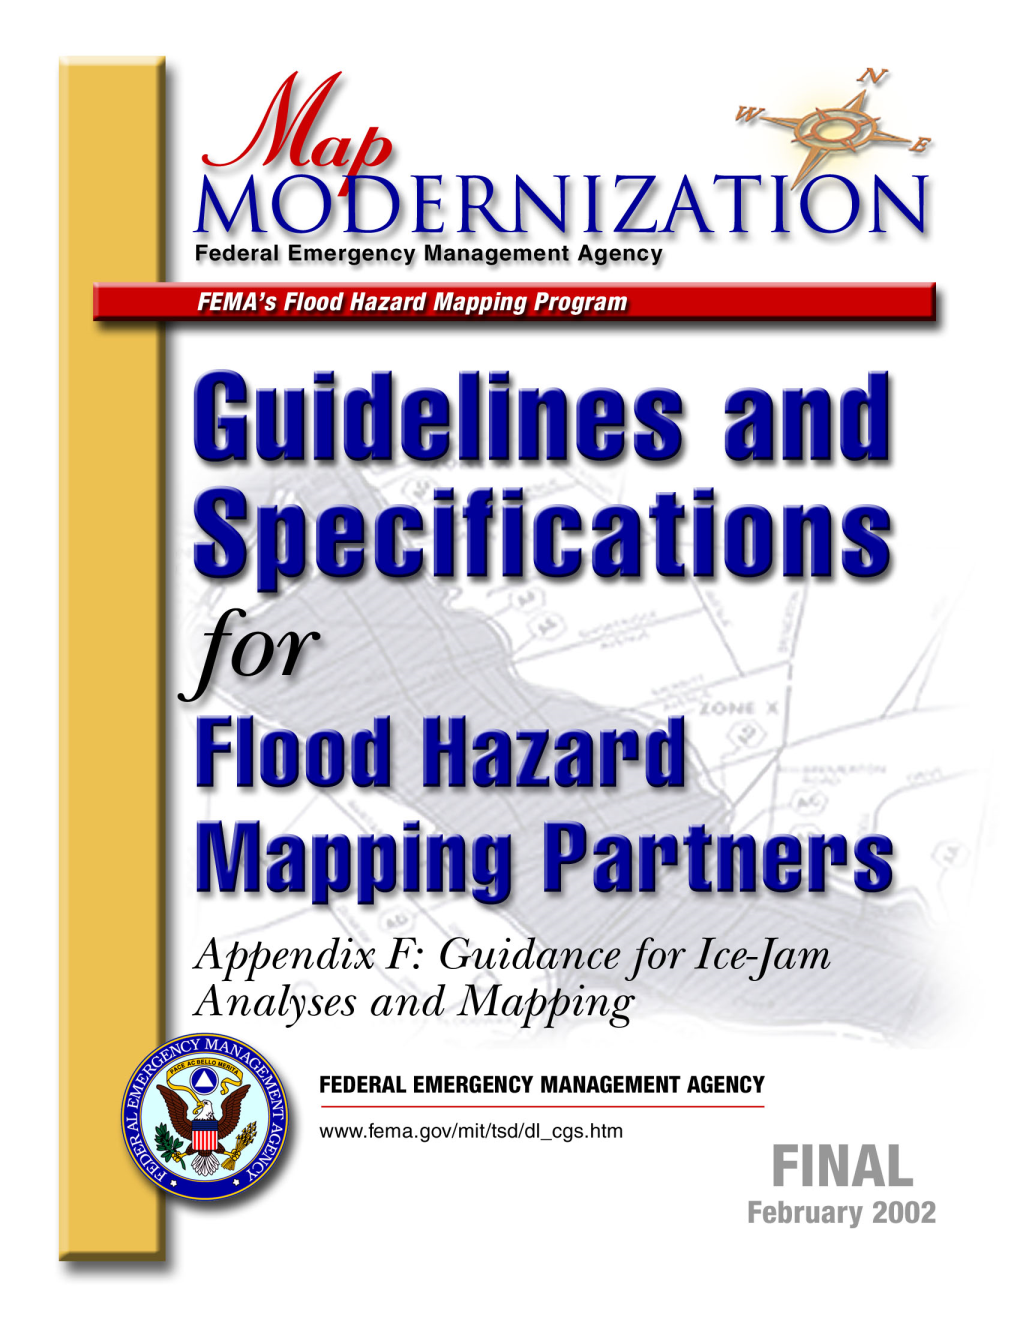 Guidelines and Specifications for Flood Hazard Mapping Partners